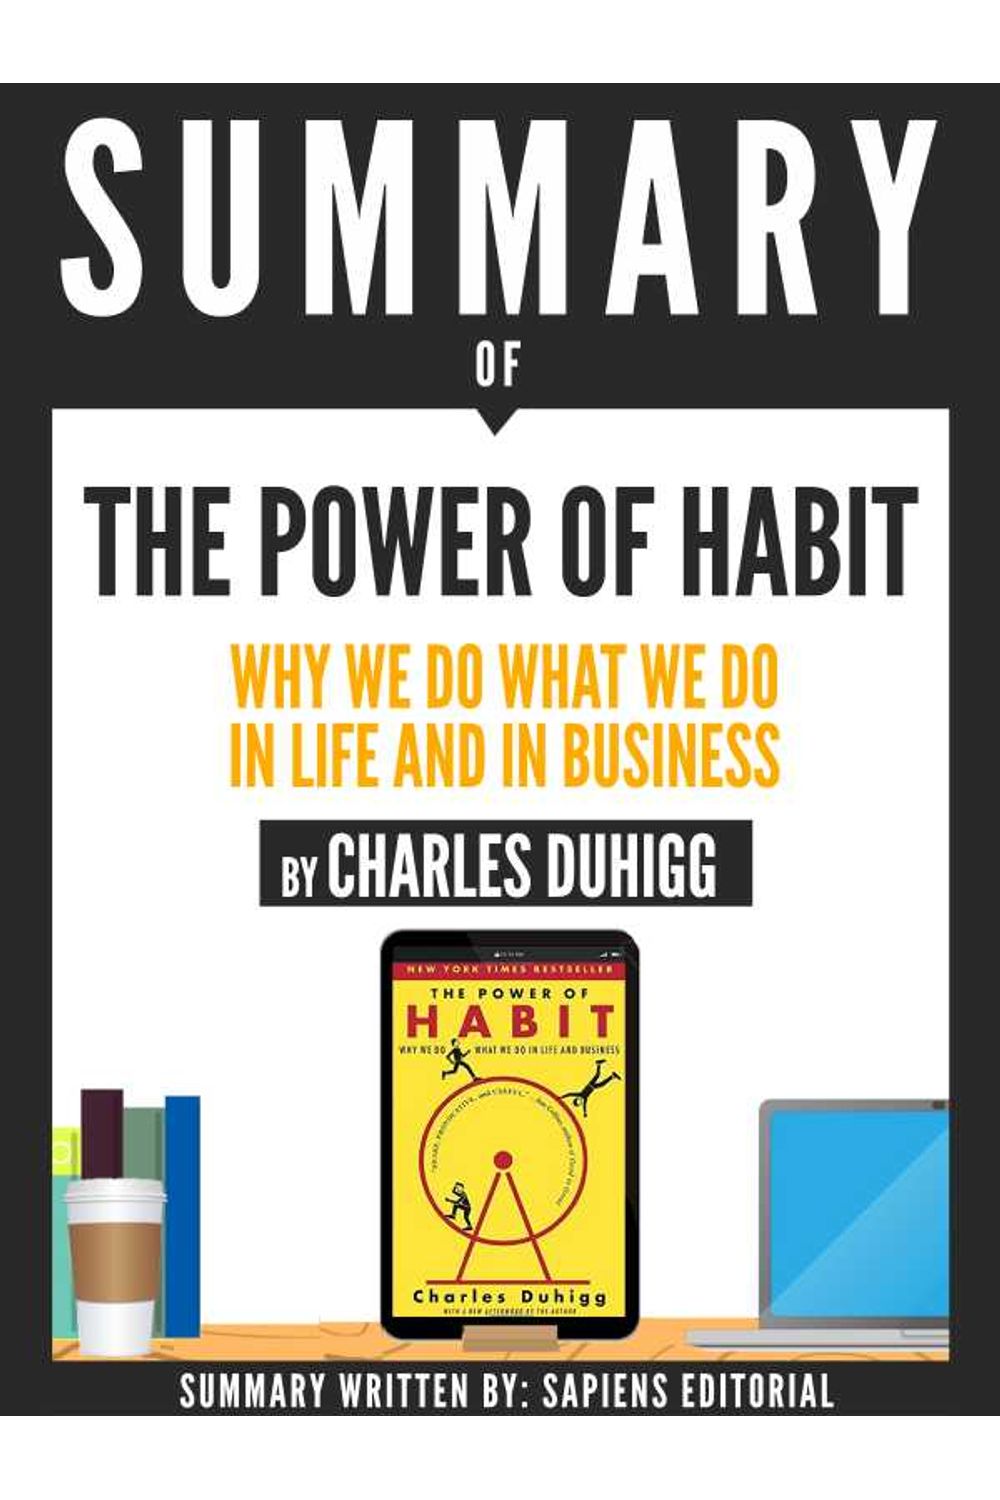 bw-summary-of-quotthe-power-of-habit-why-we-do-what-we-do-in-life-and-business-by-charles-duhiggquot-sapiens-editorial-9783962175184